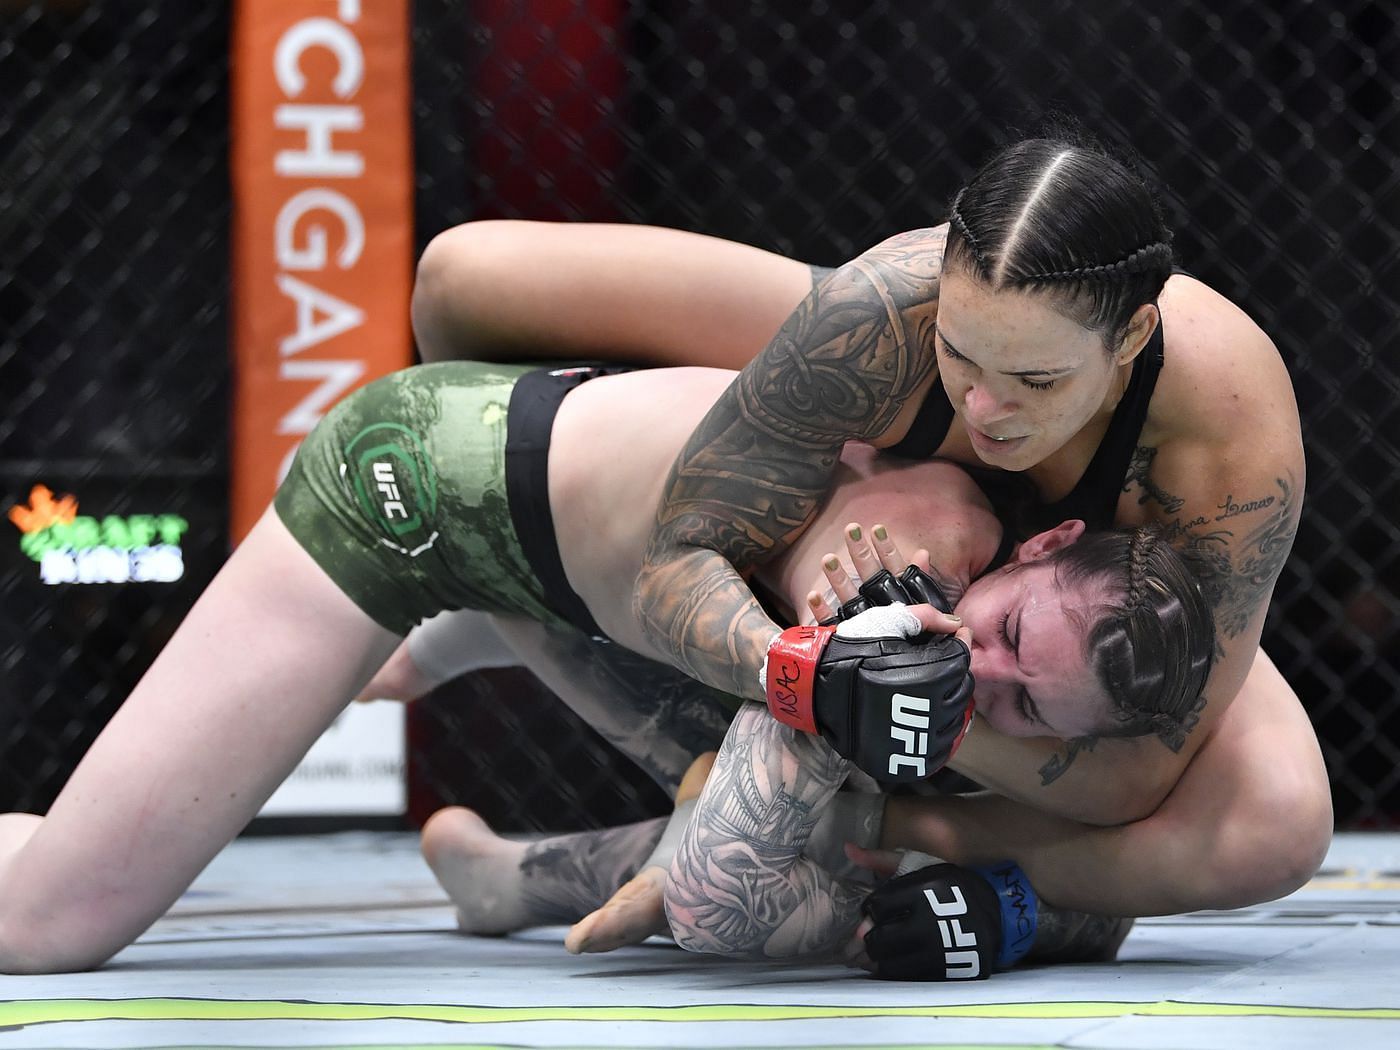 Amanda Nunes thoroughly dominated a dangerous contender in the form of Megan Anderson earlier in 2021